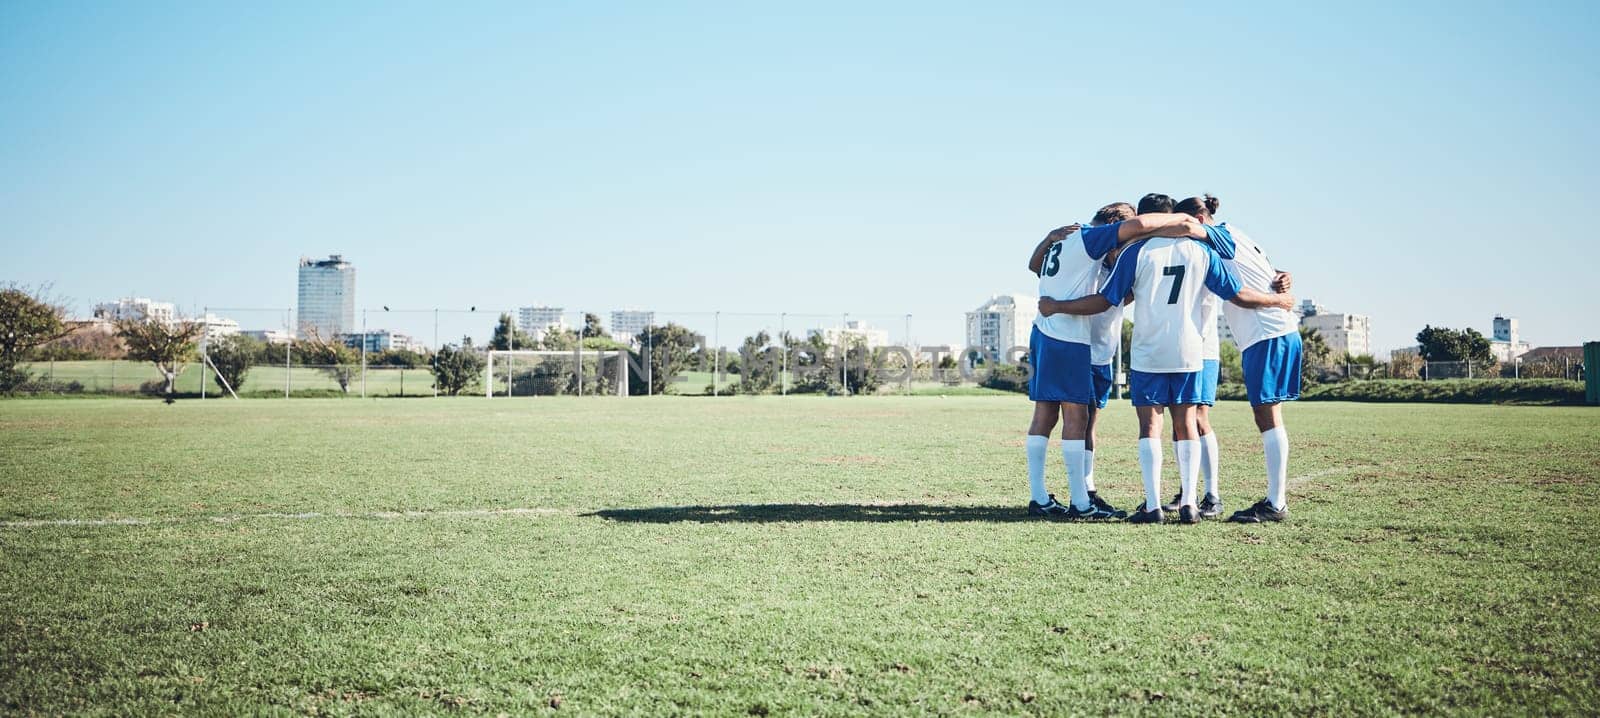 Sports, mockup and a team of soccer players in a huddle on a field for motivation before a game. Football, fitness and training with man friends getting ready for competition on a pitch together by YuriArcurs